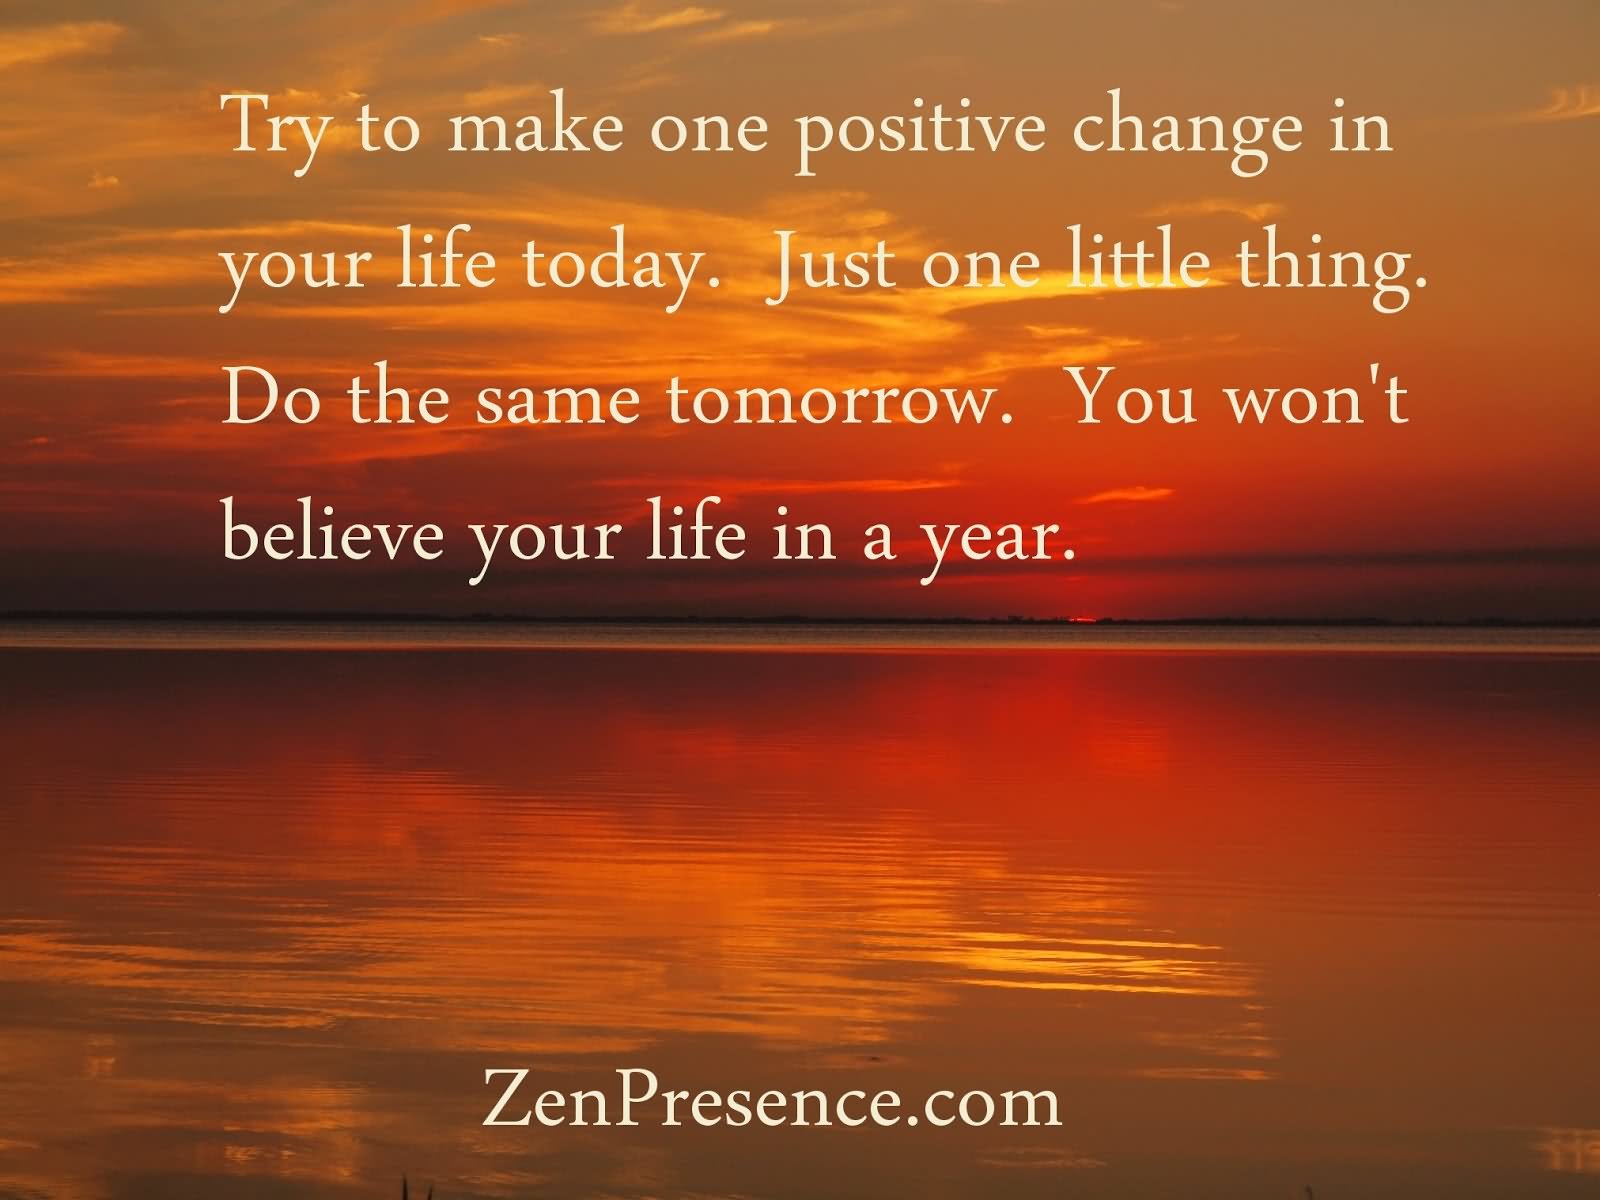 Try to make one positive change in your life today just one little thing do the same tomorrow you won’t believe your life in a year.